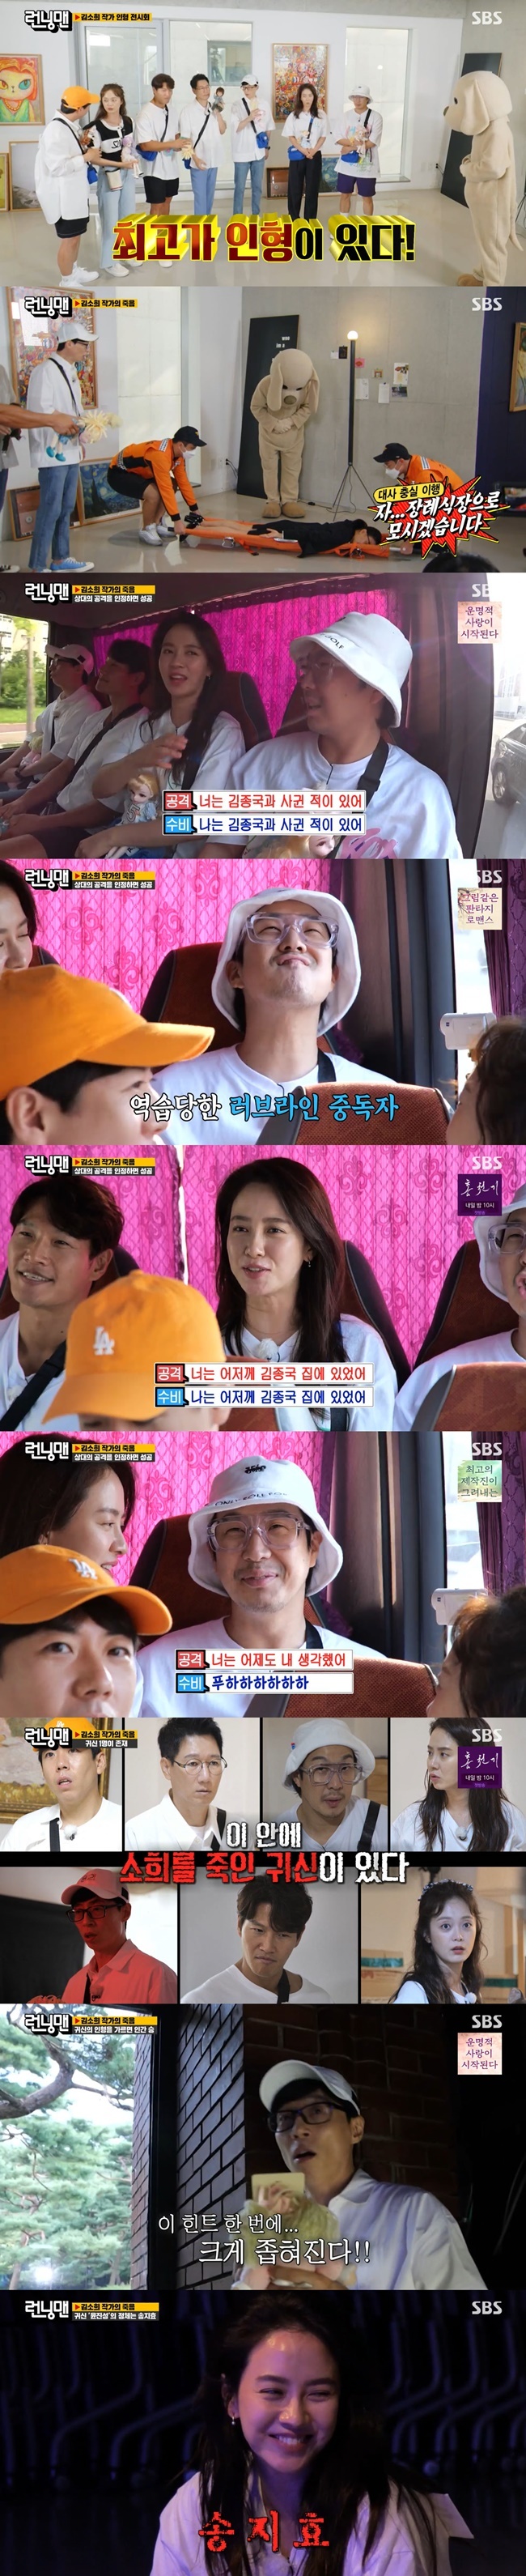 Song Ji-hyo and Haha engaged in a war of nerves like spears and shields.On August 29, SBS Running Man, a mystery Differential Race was held to find the best Doll by Kim So Hee.On this day, the members chose one limited edition handmade Doll in search of the Doll exhibition of Kim So Hee artist God of Handmade Doll.Kim So Hee wrote a will that by 8 pm today, the best will inherit both Dolls ownership and property to the person holding Doll.First, the quality test was conducted to get a hint about the best Doll.It was Yoo Jae-Suk and Haha who got the hint with the I draw with memory mission that draws the brand logo.The second was the alma mater tour by writer Kim So Hee; the members followed the attack handed by the other party and decided to get off the bus through the game they recognized.Haha told Song Ji-hyo, You have dated Kim Jong-kook, and Song Ji-hyo responded, I have dated Kim Jong-kook.Song Ji-hyo also counterattacked Haha, who had drawn love lines with himself in the past, saying, Youre still thinking about me.Haha also responded, You were at Kim Jong-kooks house yesterday; Song Ji-hyo, who heard this, hit back, You thought of me yesterday.Embarrassed, Haha burst into laughter and was eventually defeated, so Song Ji-hyo urgently shouted Go Eun-ah sorry towards Hahas wife star.The turnaround was unfolded. The best was Doll, who was actually cursed.Also, among the members, ghosts are hiding, and in order to save innocent humans, it was Race to find ghosts and cursed Dolls.In particular, Dolls stomach contains the names of the members and the identity of the ghosts, and when the ship is divided, the members are eliminated if the names of the members are not ghosts.The members combined hints to find ghosts at Dolls house; however, the members failed their first attempt, and Kim Jong-kook, who was pointed out by the ghost, became the first dropout.In the second attempt, Yoo Jae-Suk was eliminated as a ghosts mark.The members speculated that the ghost was the weakest member when Kim Jong-kook Yoo Jae-Suk, who is considered to be a strong player in Running Man, was eliminated one after another.Haha went on to insist on cutting Dolls boat.Ji Suk-jin actively recommended Doll No. 3, and Doll No. 3 was a self-defeating figure with Ji Suk-jins name tag.